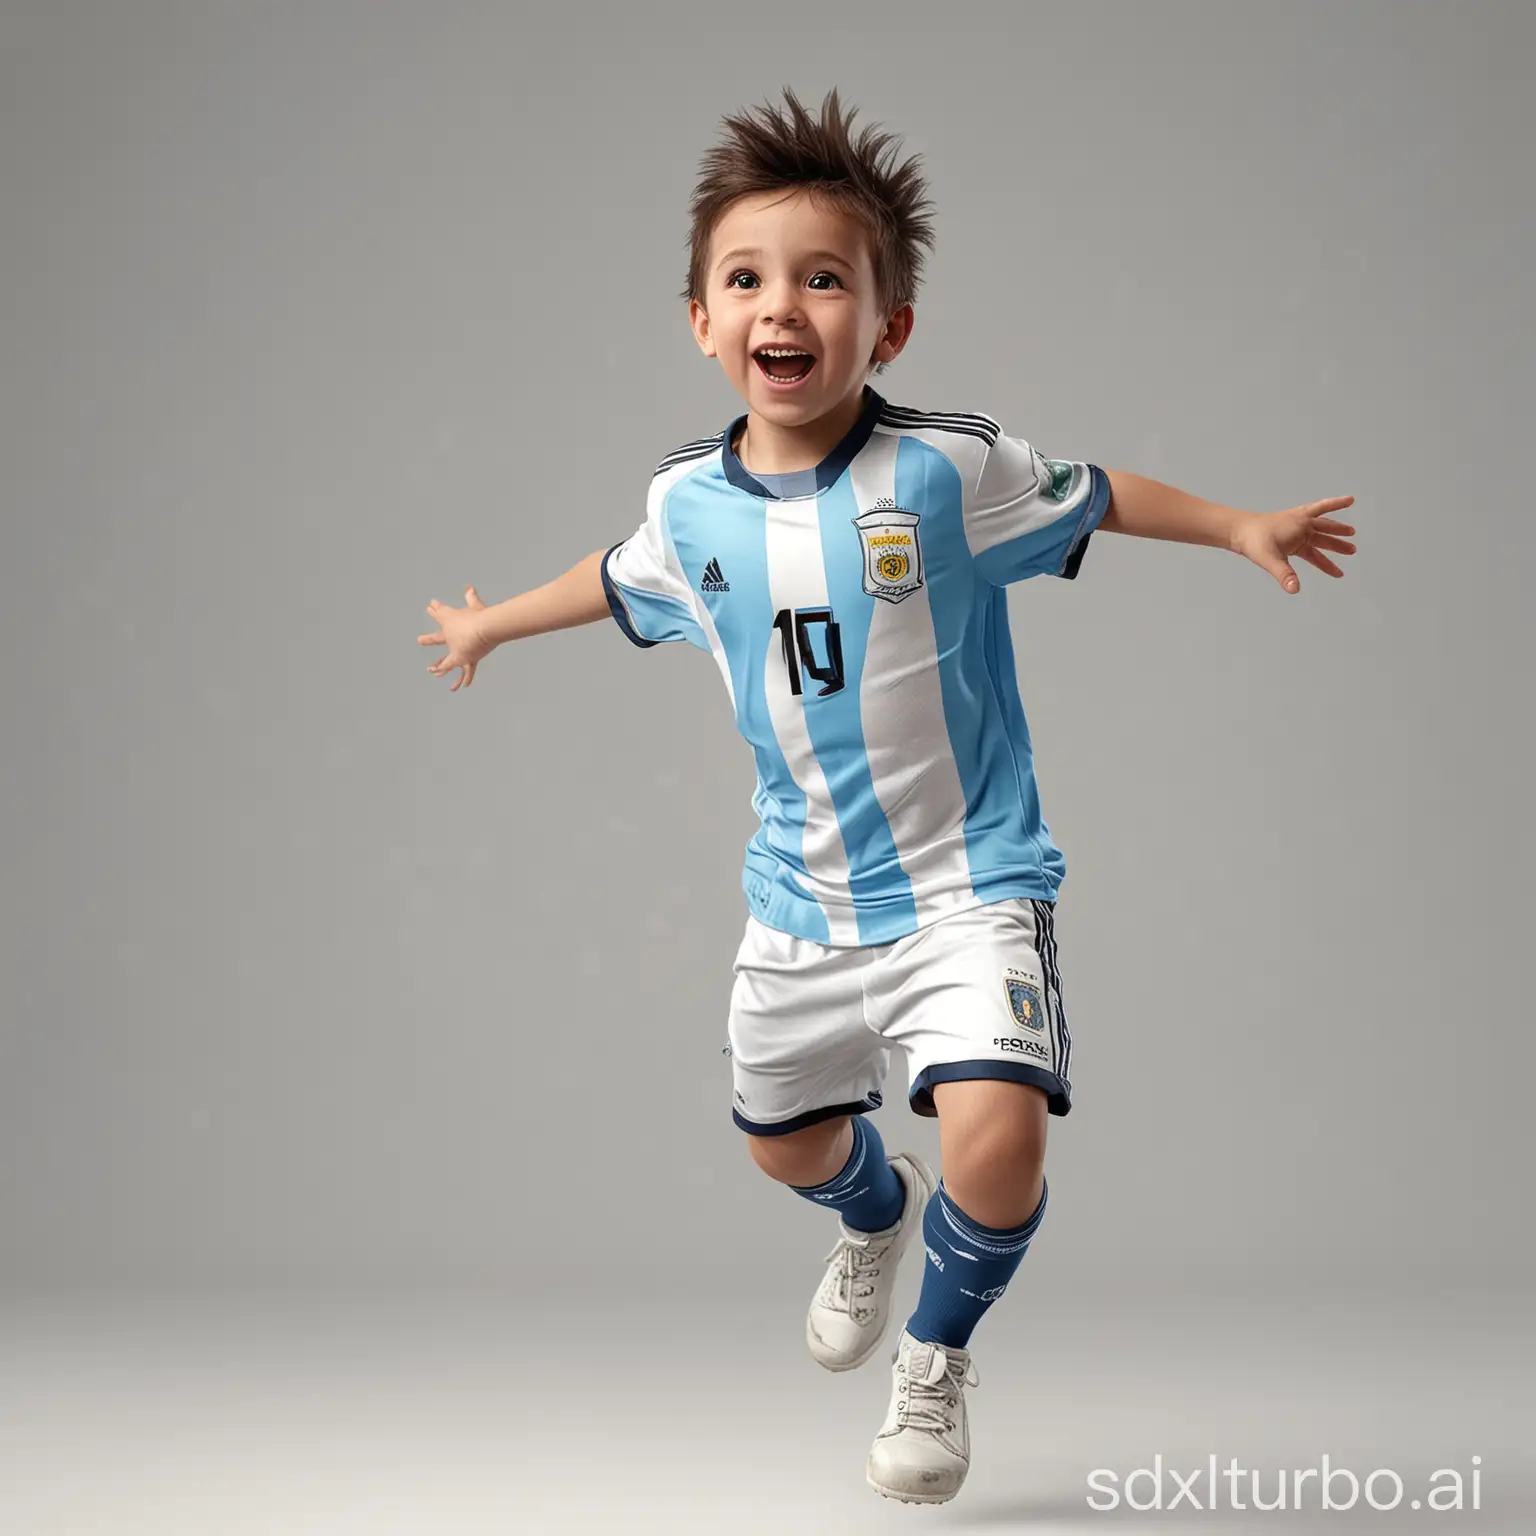 cute kid, wearing argentina soccer jersey, happy and having a good time, cute, jumping in the air excited on a plain white background. This is a full body photo realistic high resolution image with sharp clean subject focus